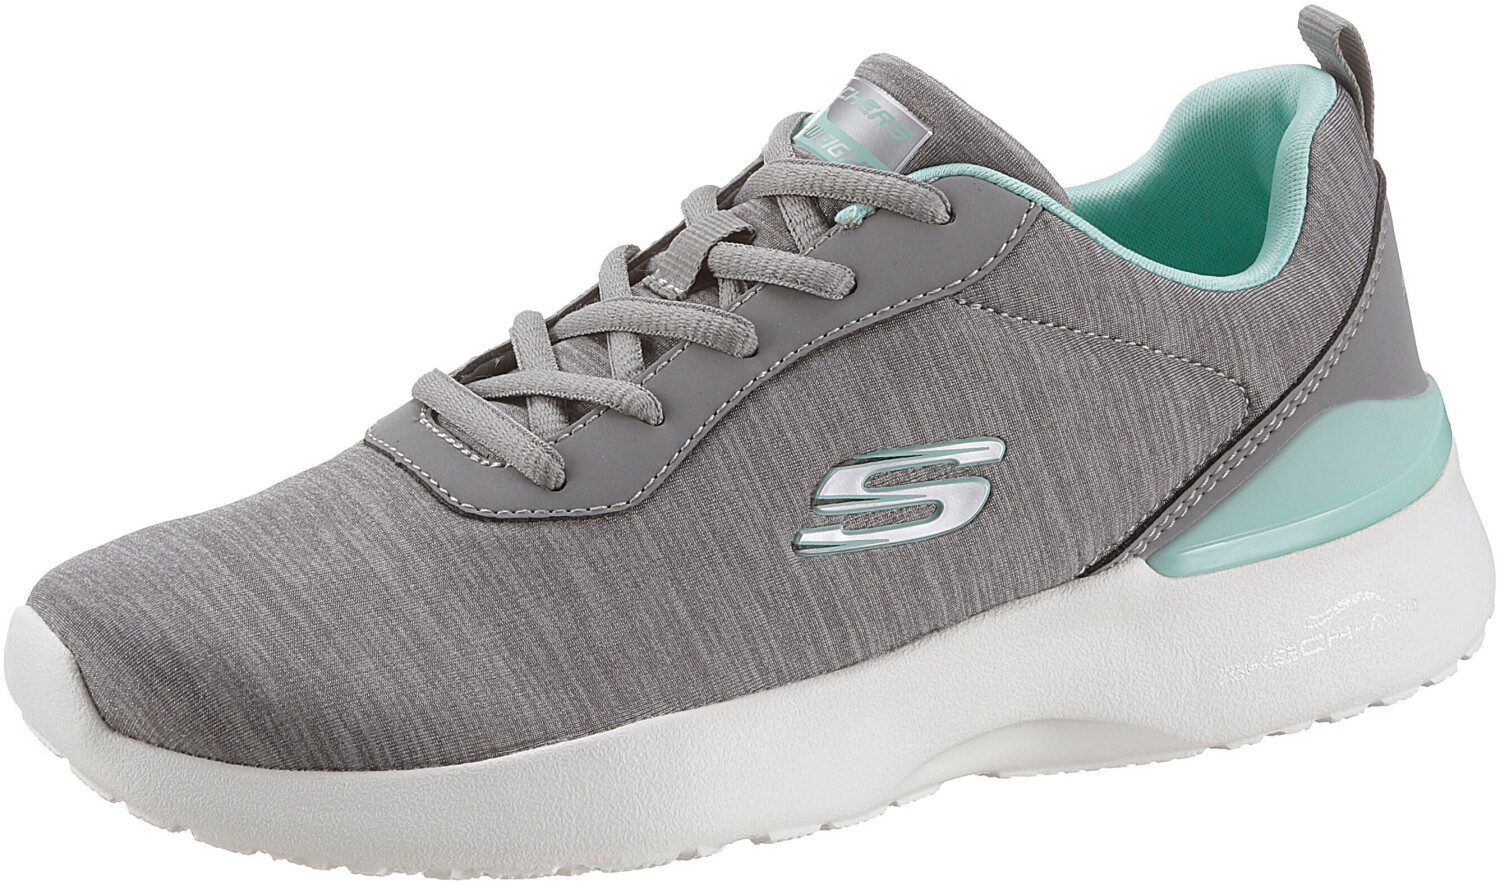 Buy Skechers Skech-Air Dynamight Paradise Waves grey/mint from £44.99 ...